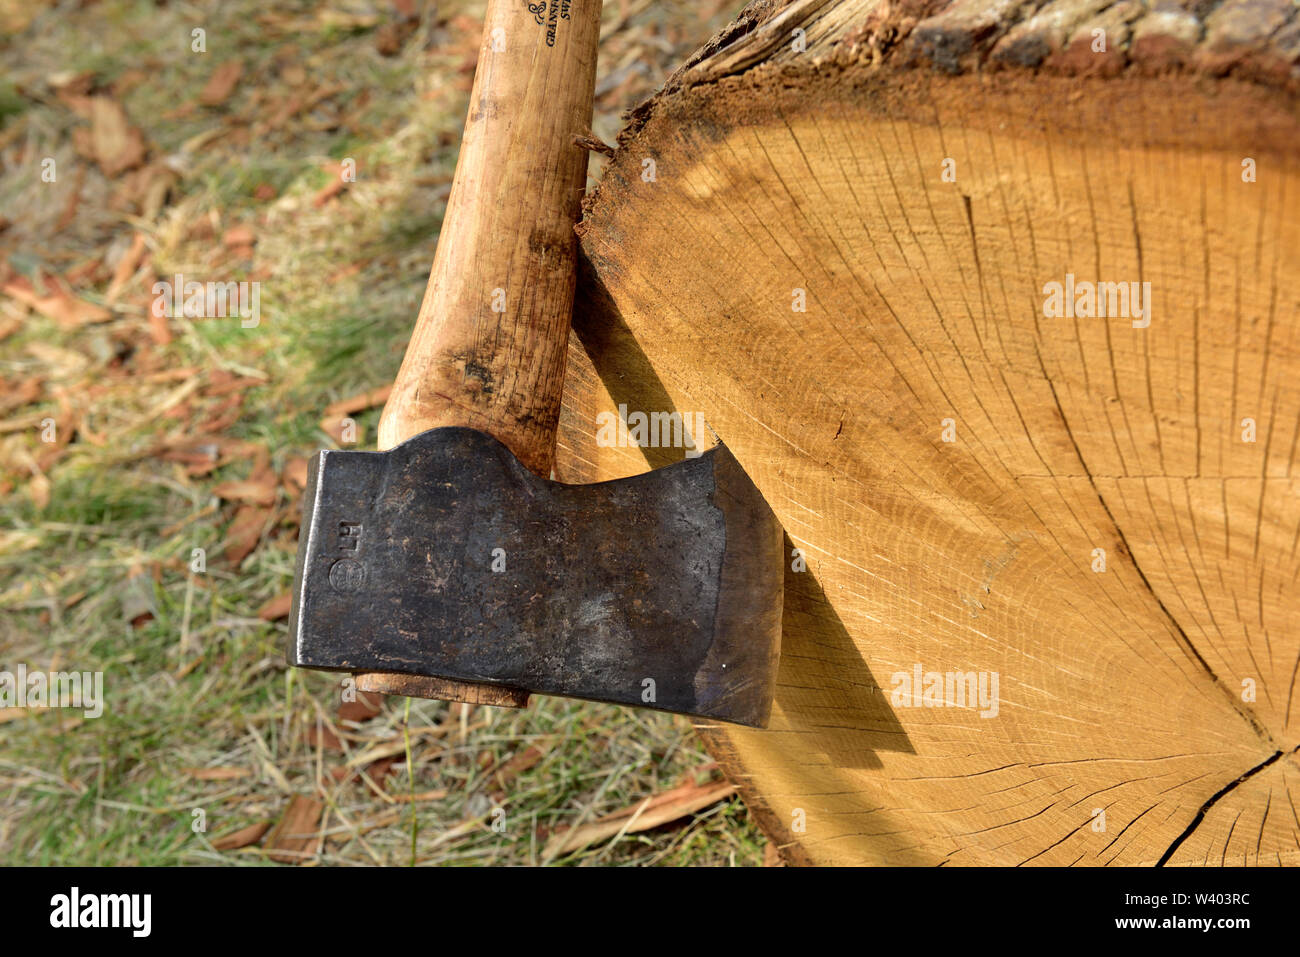 Hand axe, hatchet, stuck in the end of a log. Type used in timber framing. Stock Photo